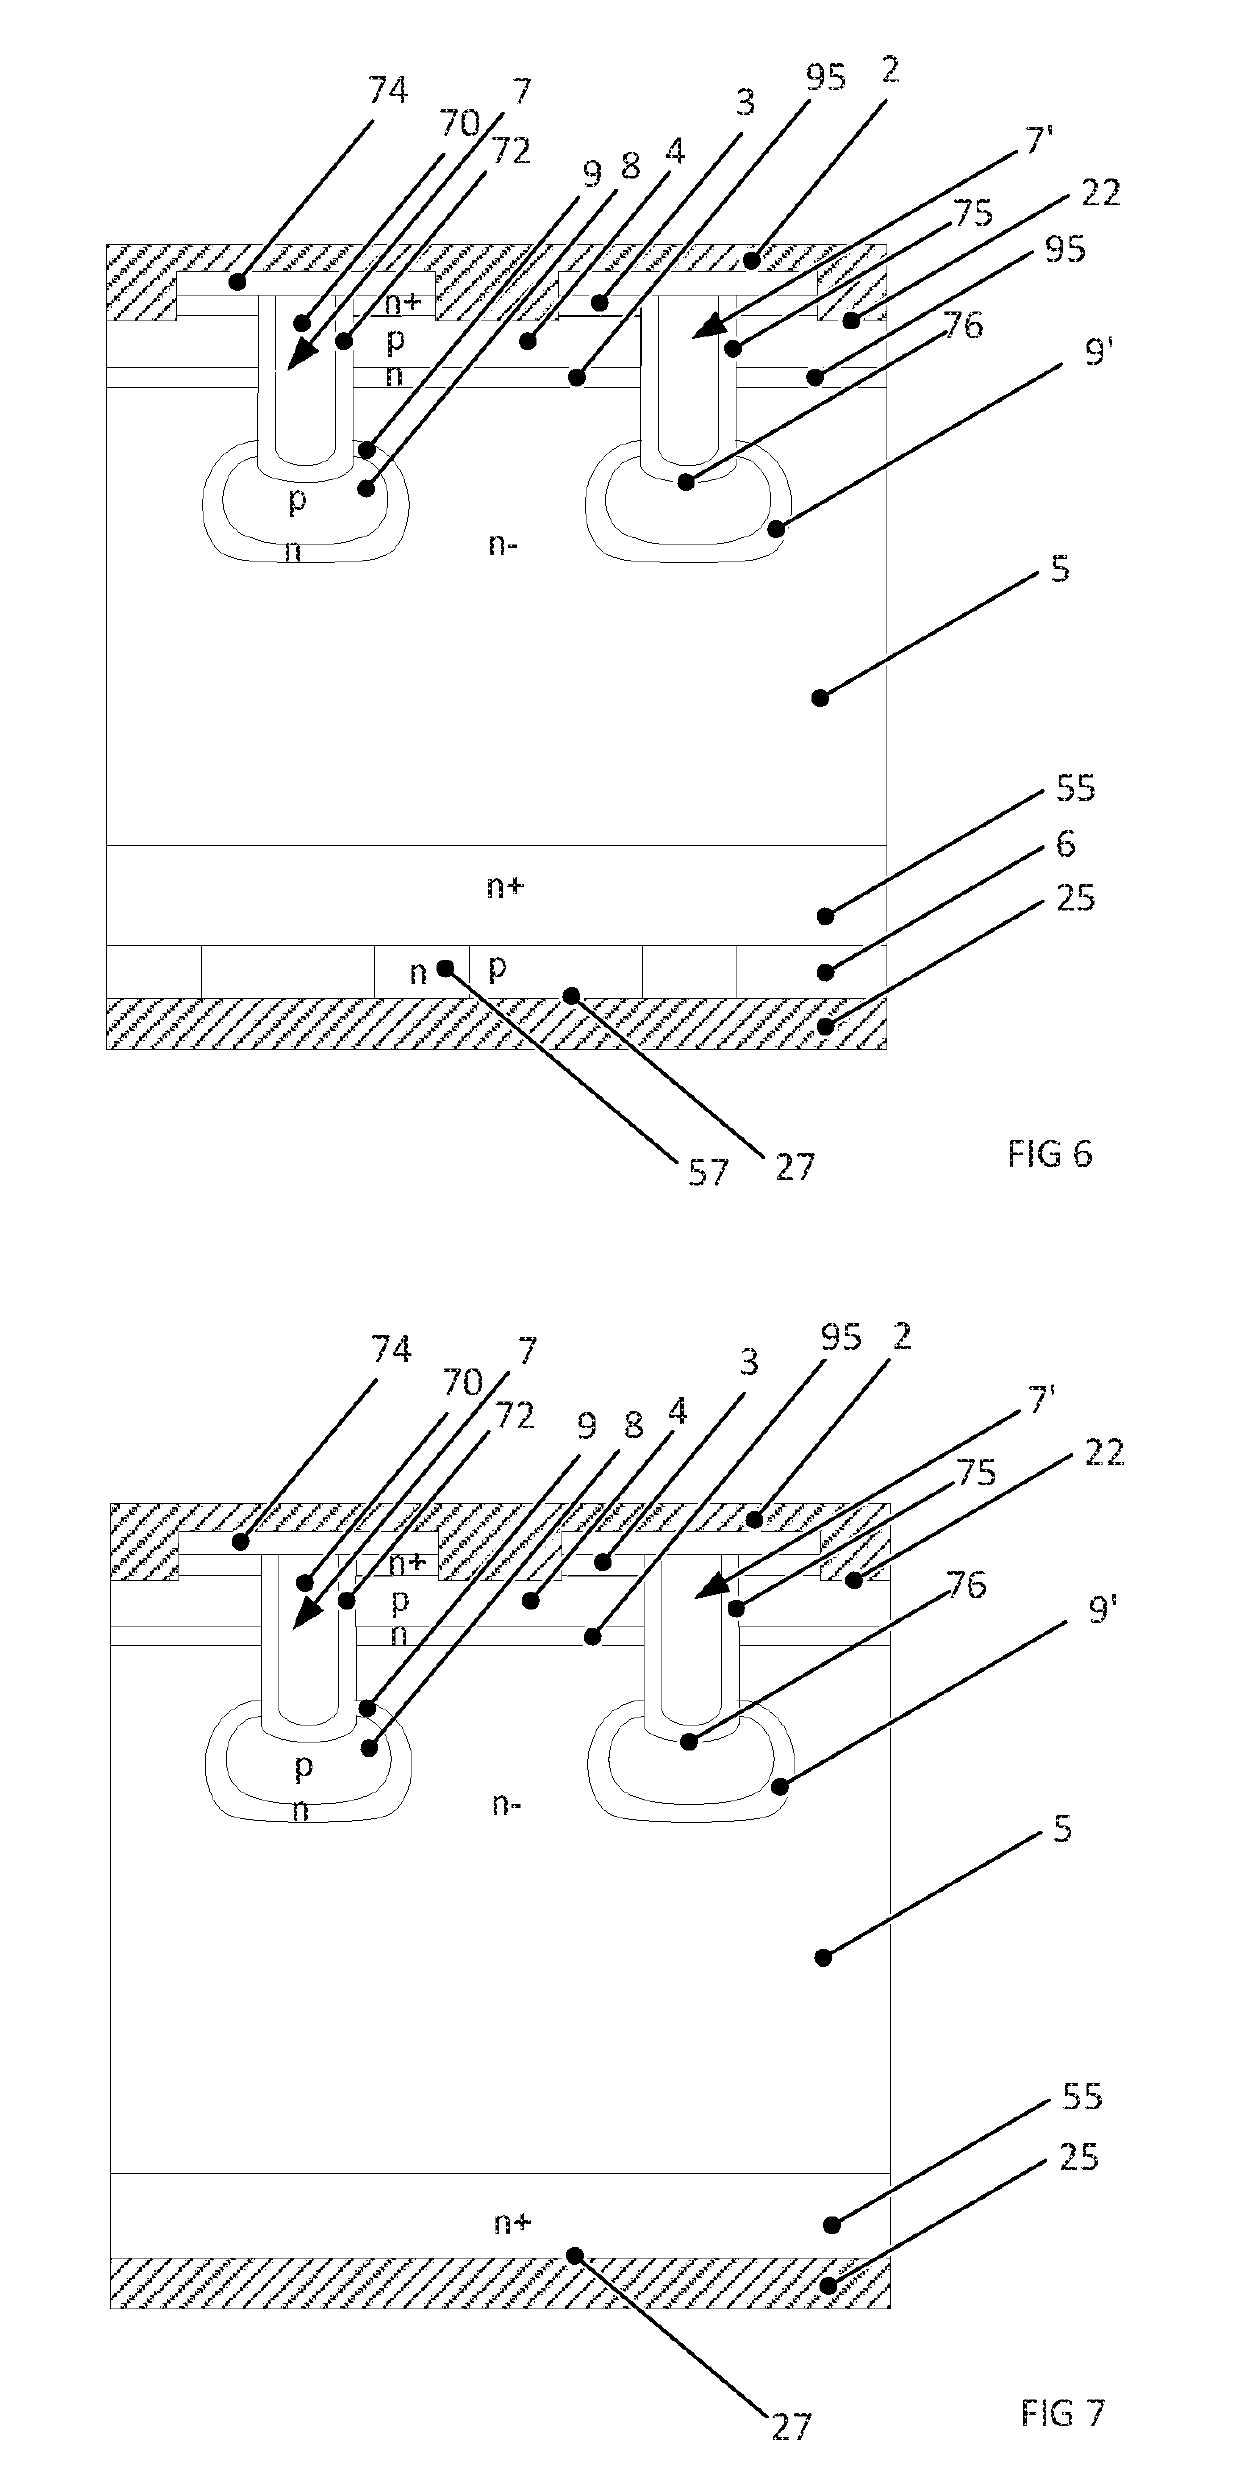 Insulated gate power semiconductor device and method for manufacturing such a device